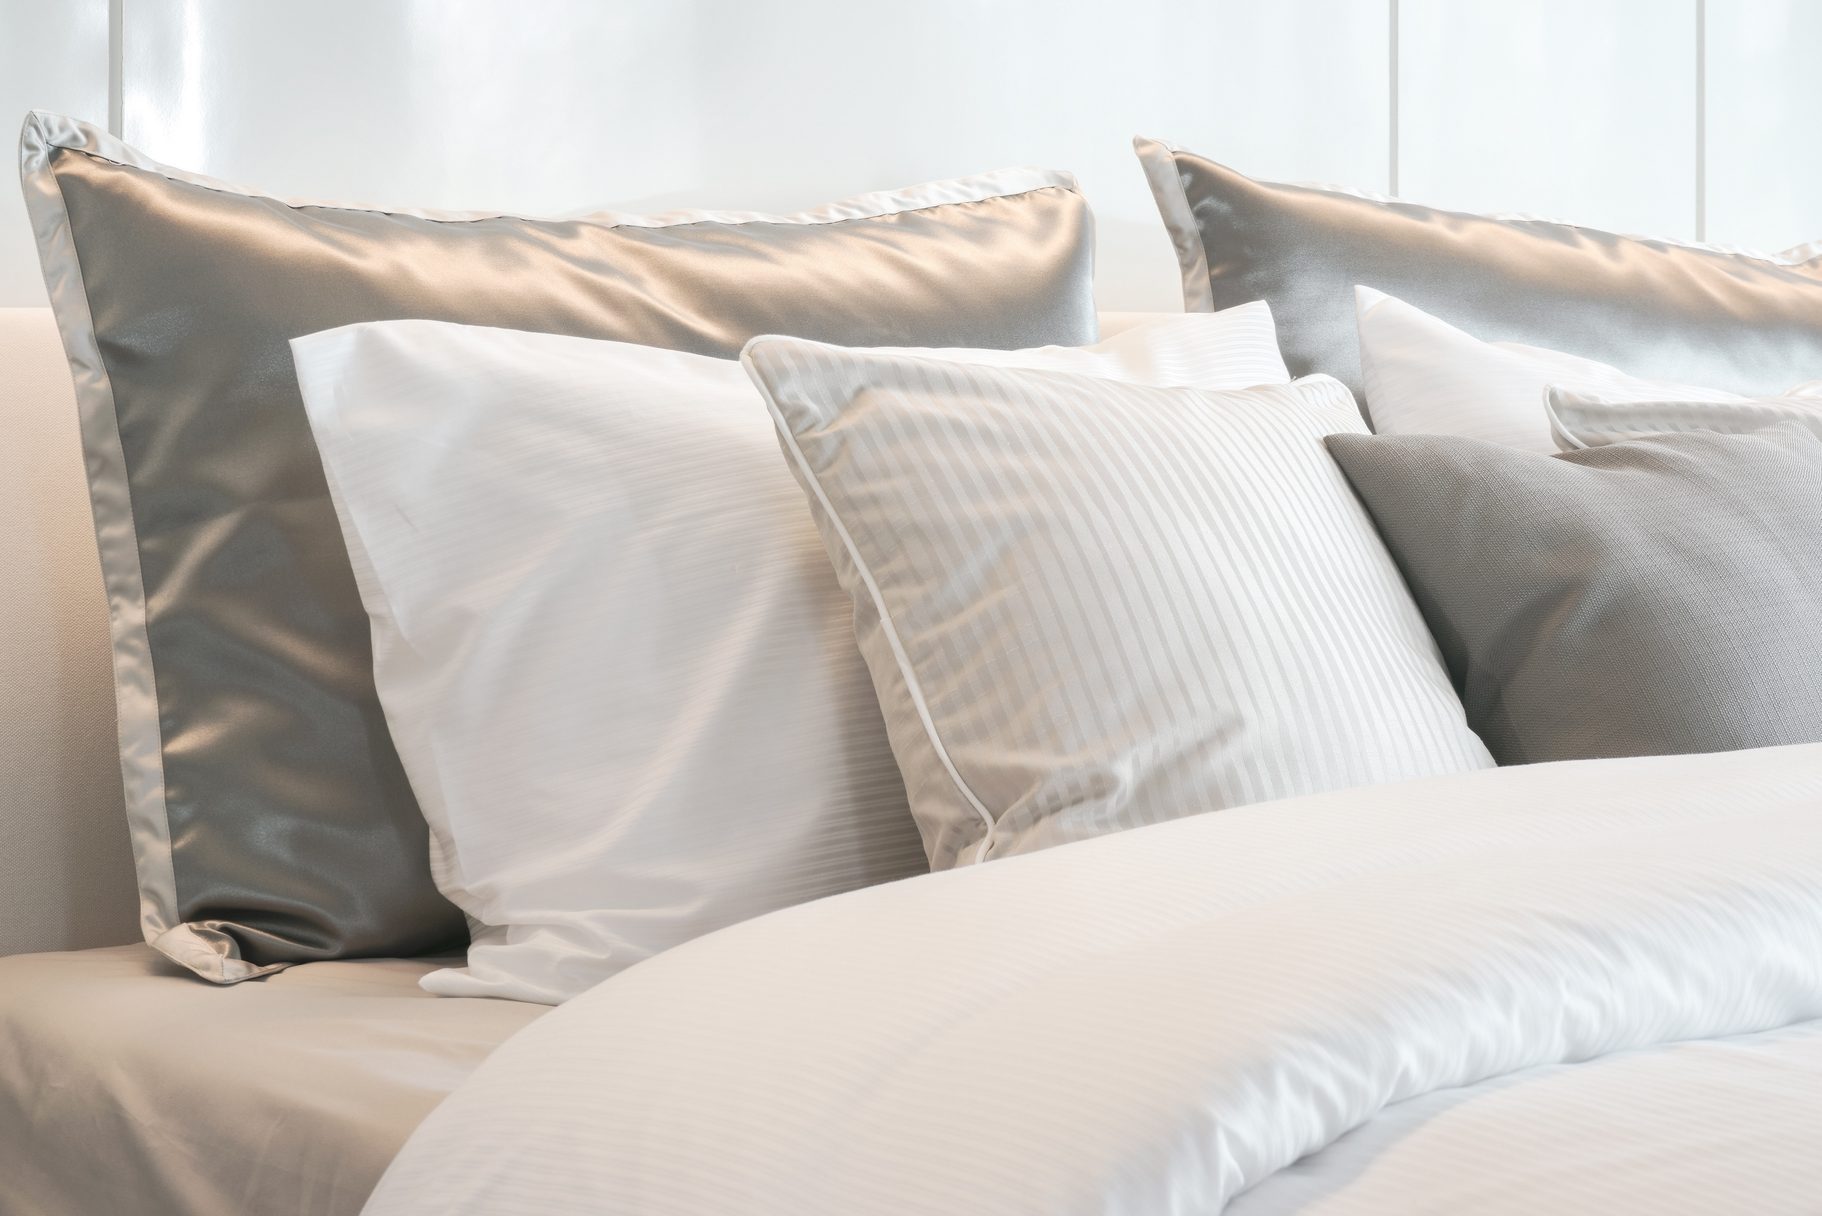 How to Wash Pillows So They're Clean, Snuggly and Lump-Free